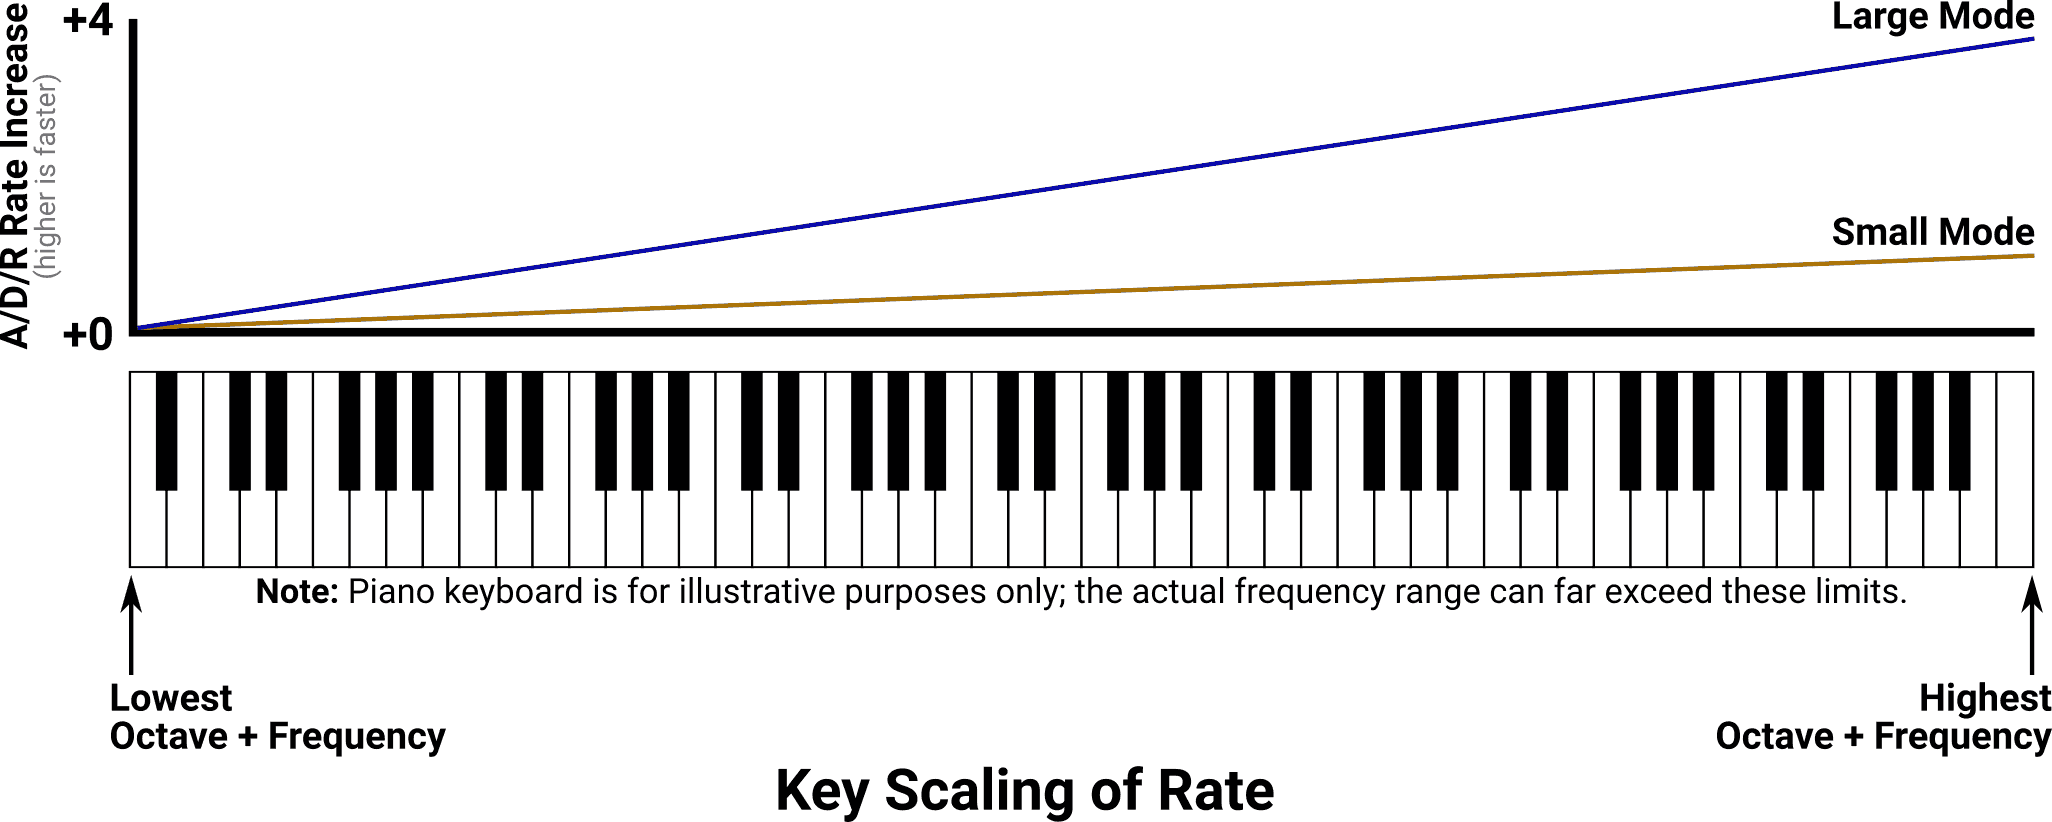 Diagram showing the overall effect of “Key Scaling of Rate”.